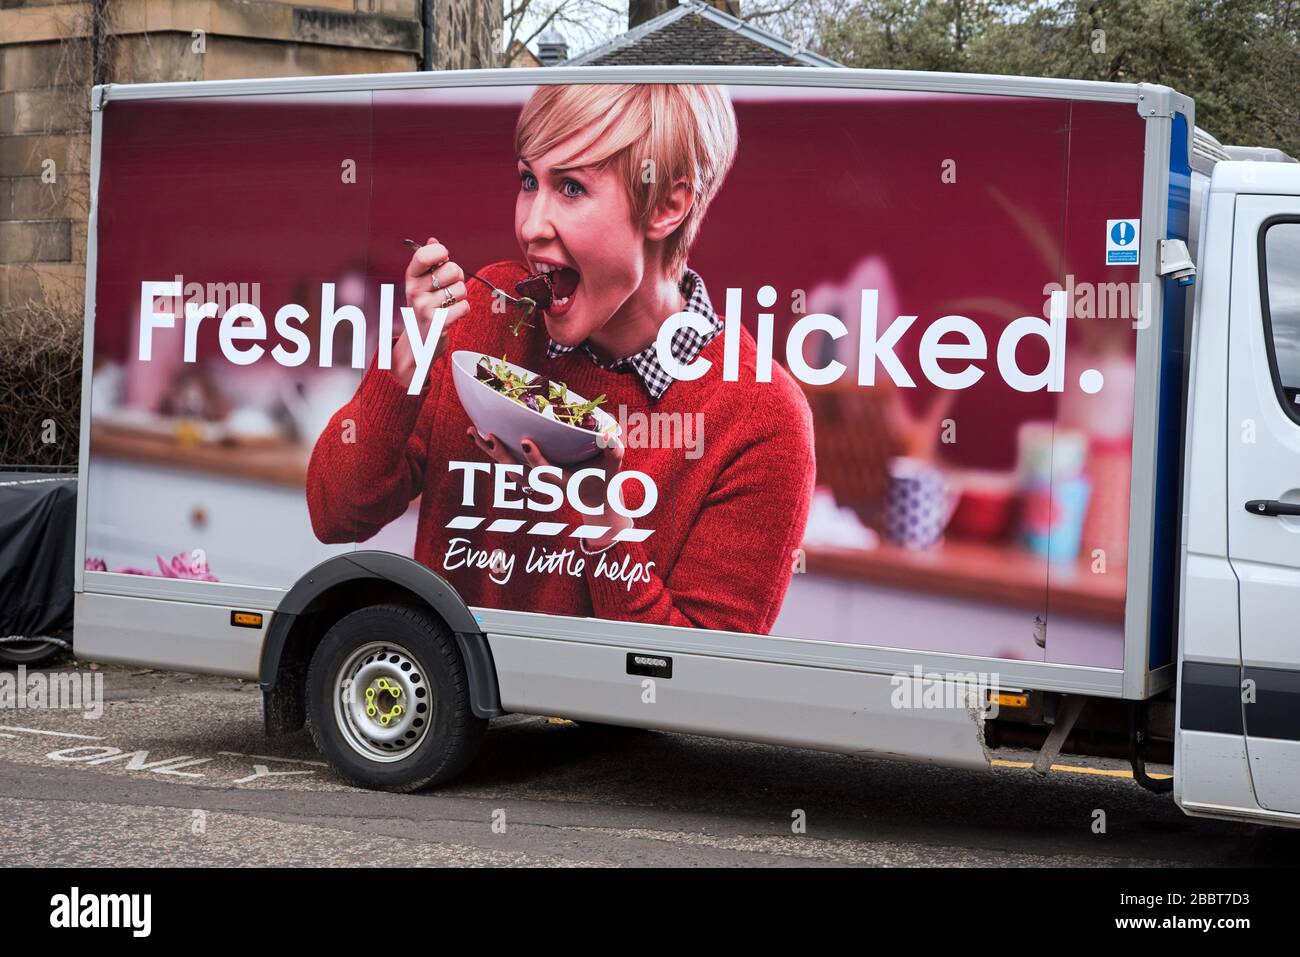 Freshly Clicked Tesco advert on the side of a Tesco delivery van in New Town, Edinburgh, Scotland, UK. Stock Photo